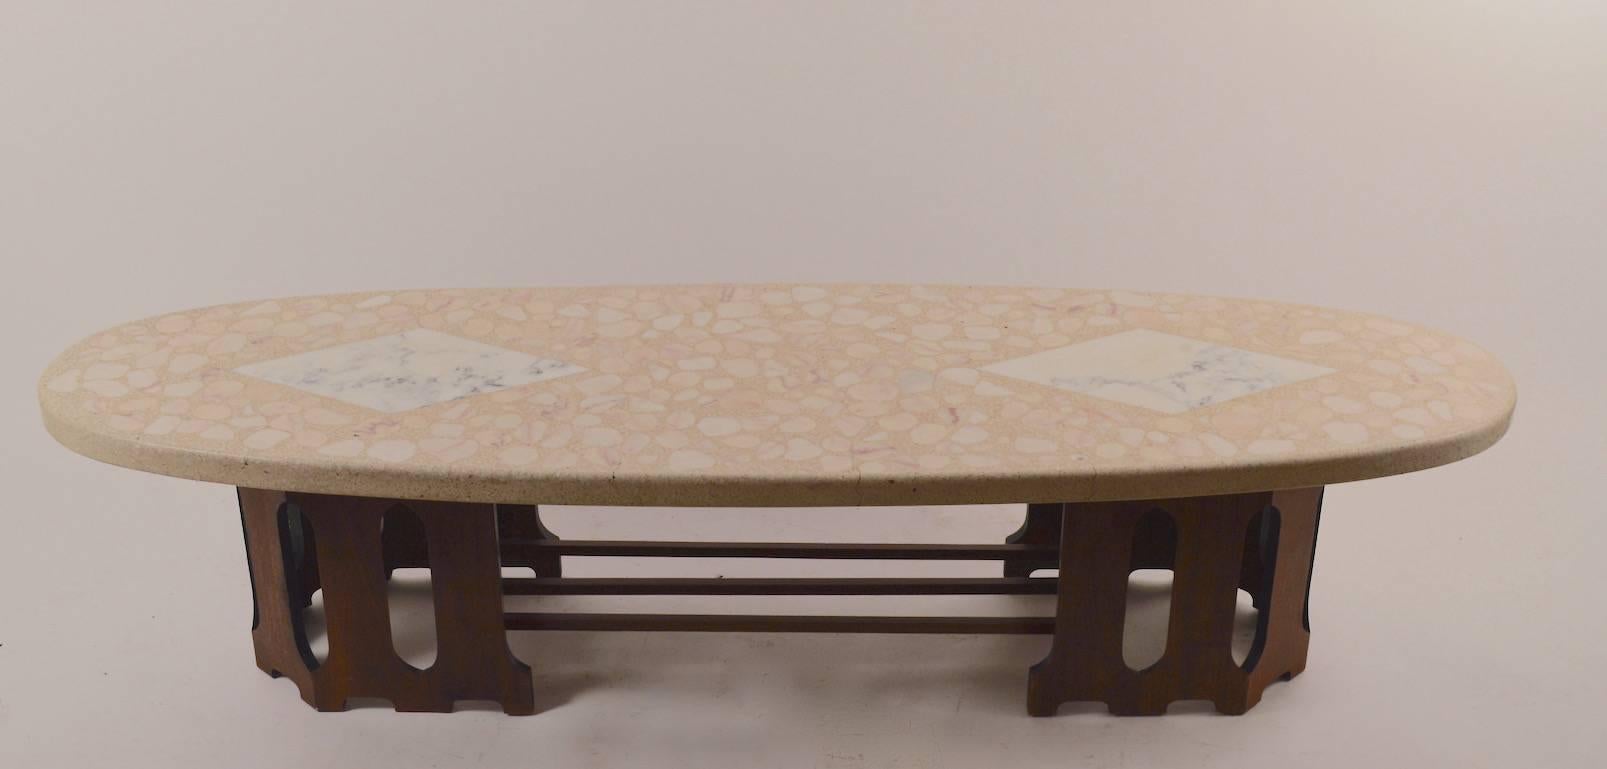 Mid-20th Century Terrazzo Top Surfboard Coffee Table For Sale